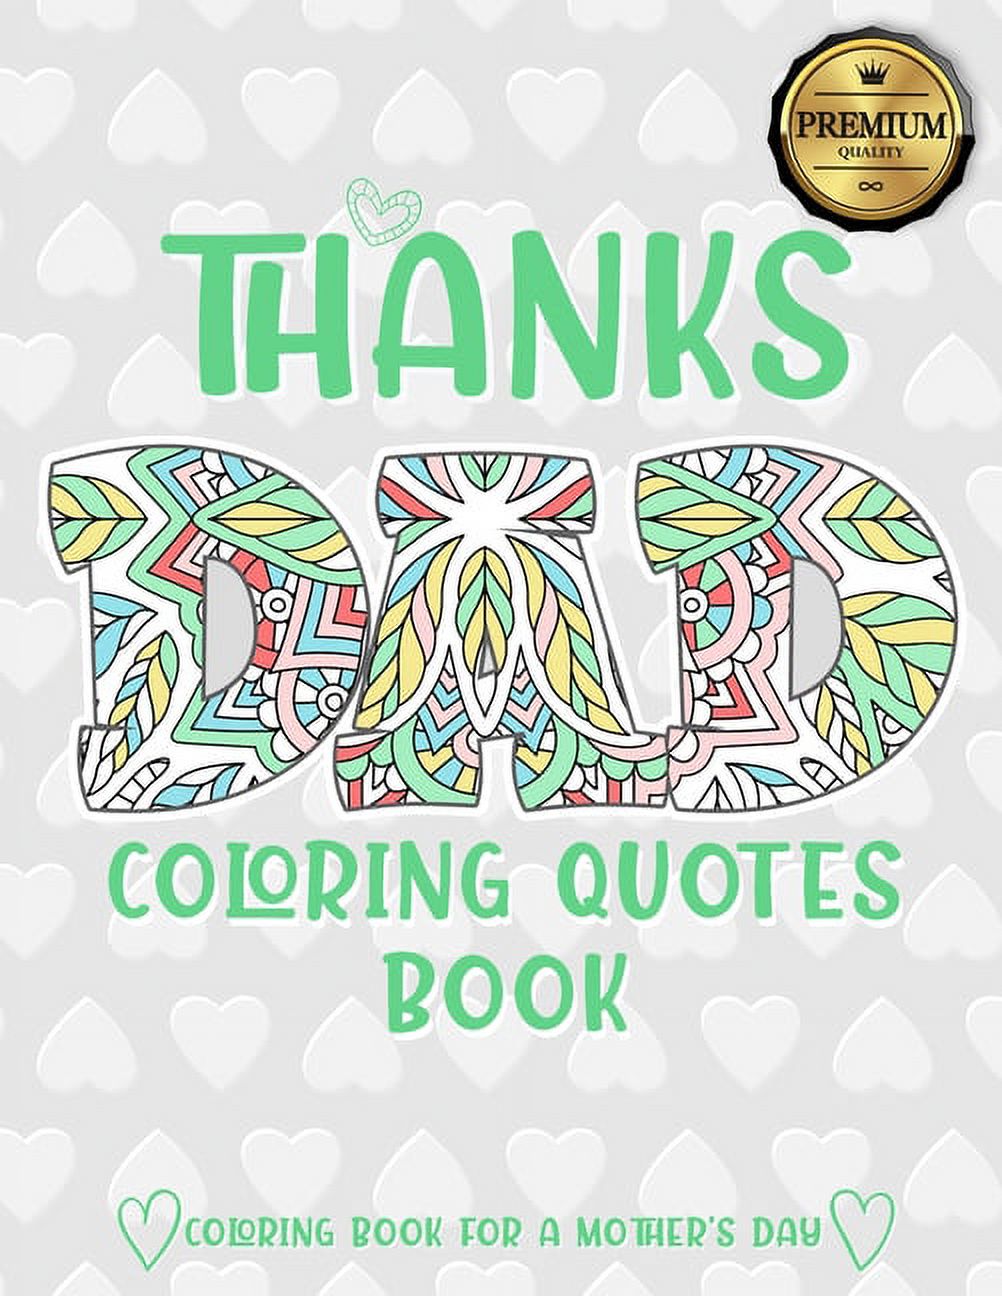 Thanks Dad Coloring Quotes Book: A quotes Coloring Book for Your Father, Son, Dads or Dad: This Stress Relieving Book Includes 30 Beautiful Illustration - Gift, Birthday Presents & Gifts for Men. (Pap - image 1 of 1